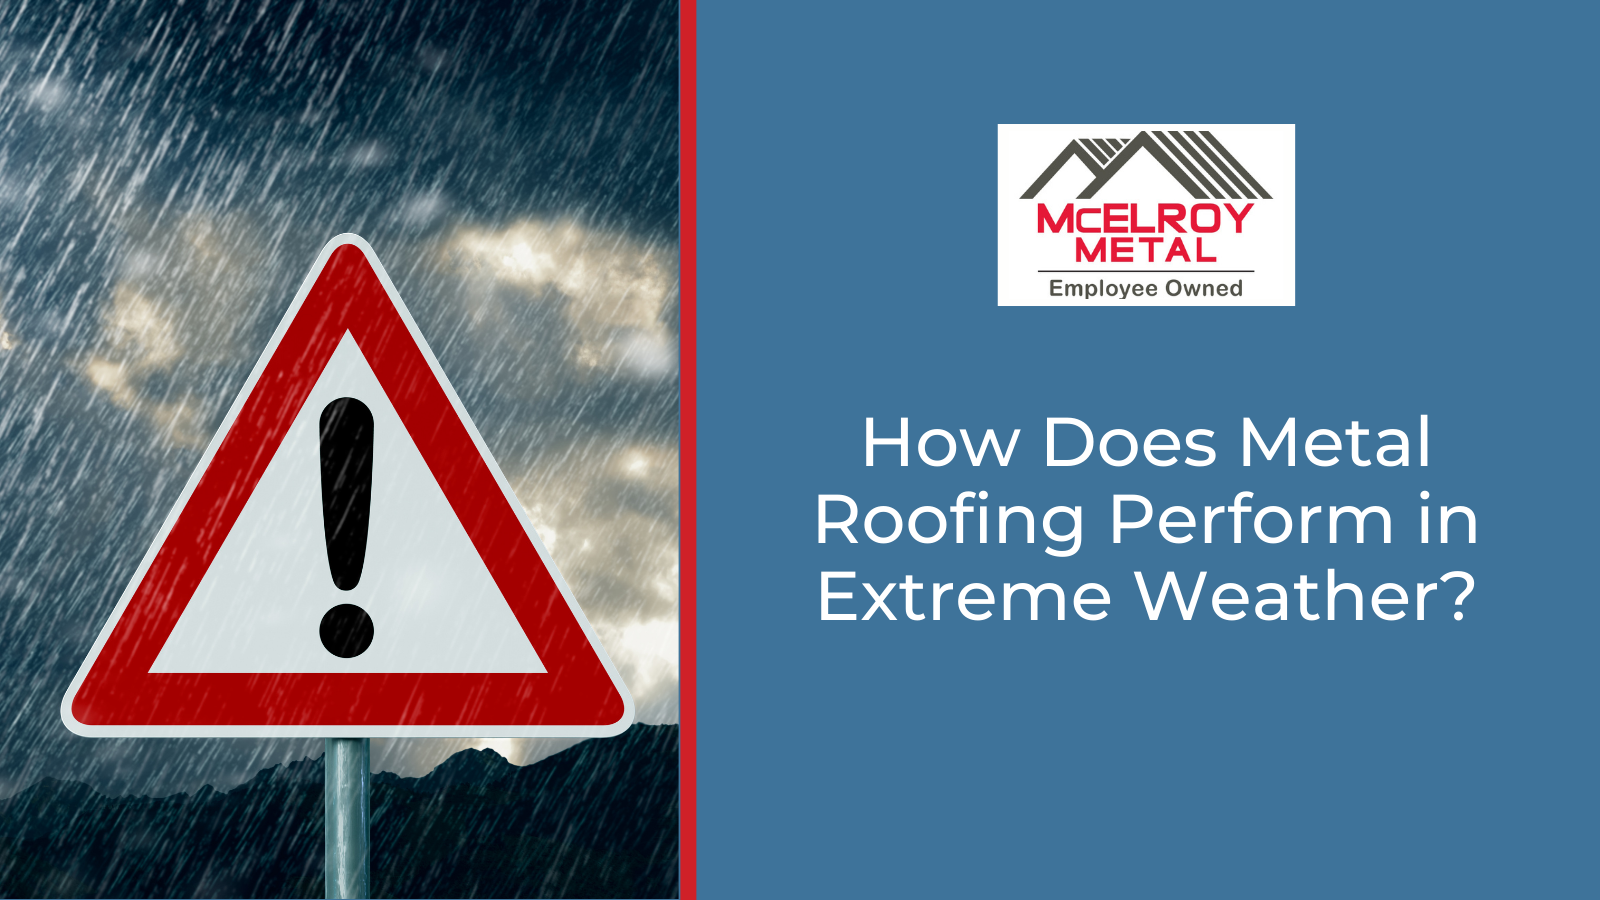 How Does Metal Roofing Perform in Extreme Weather?